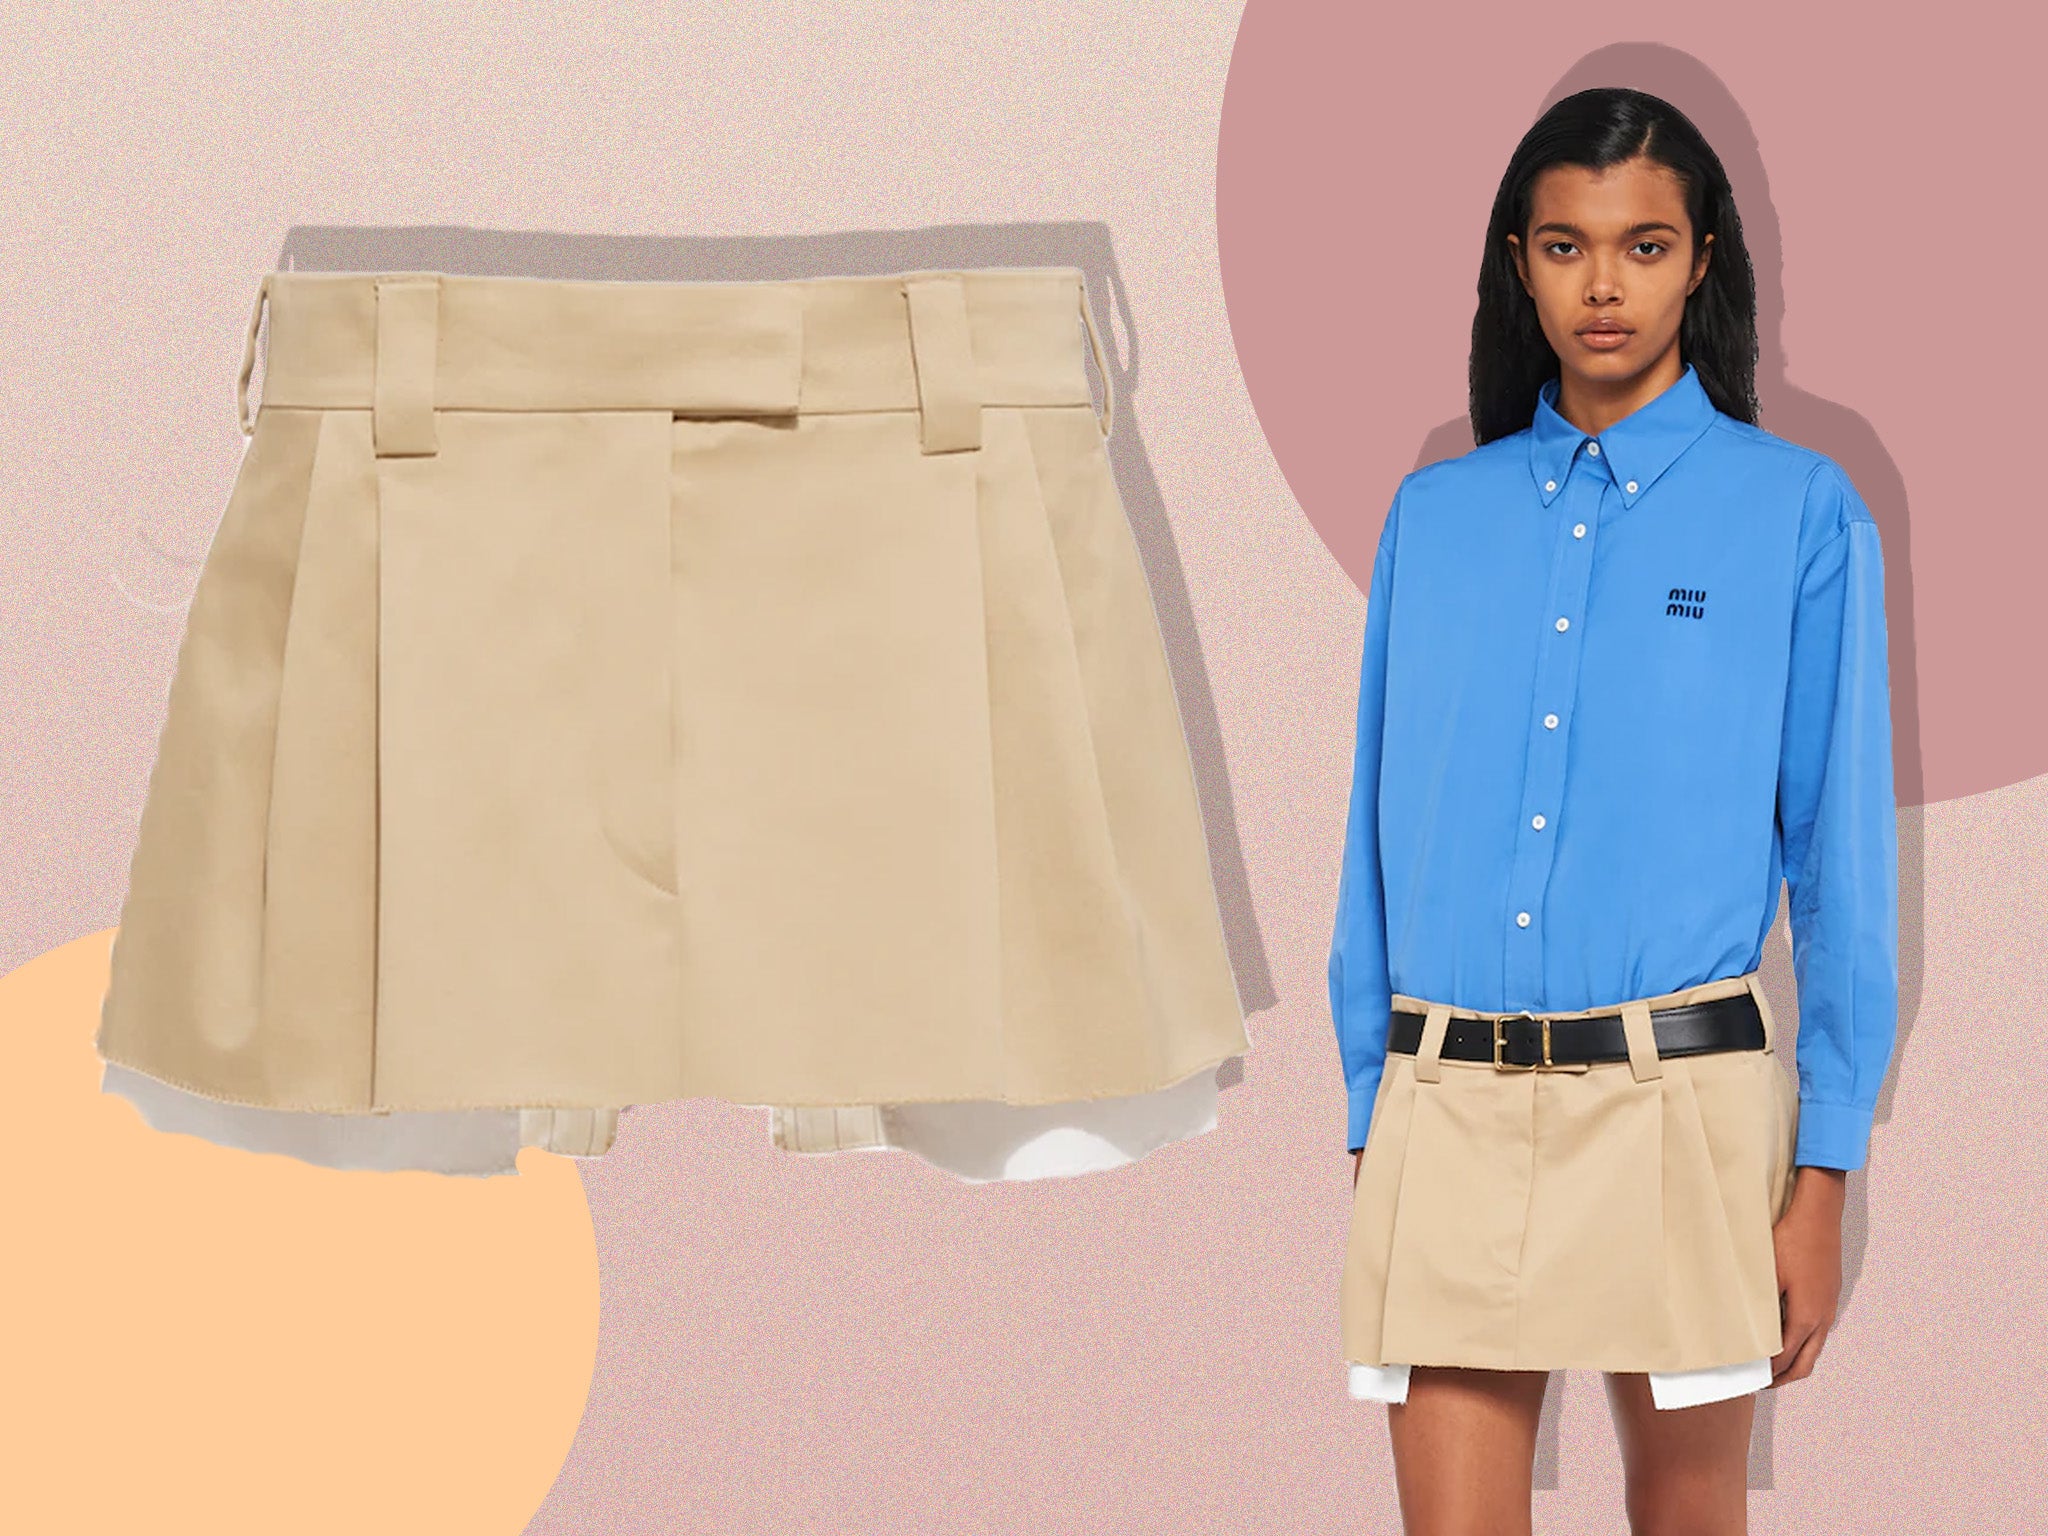 Miu Miu's viral mini skirt is everywhere right now – shop this £34.99 dupe